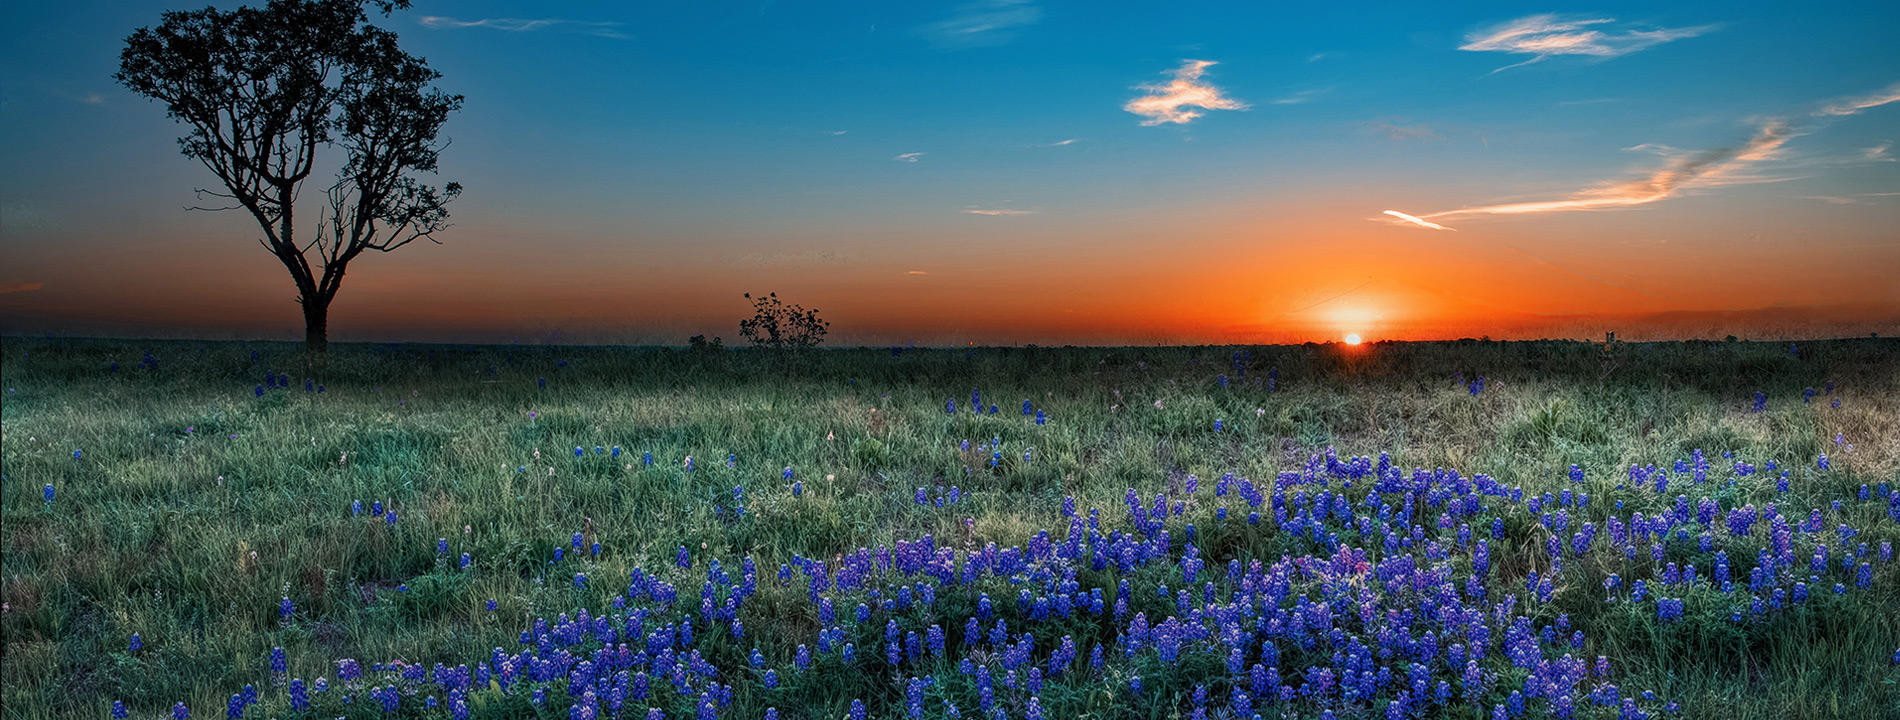 Bluebonnets in the sunset.